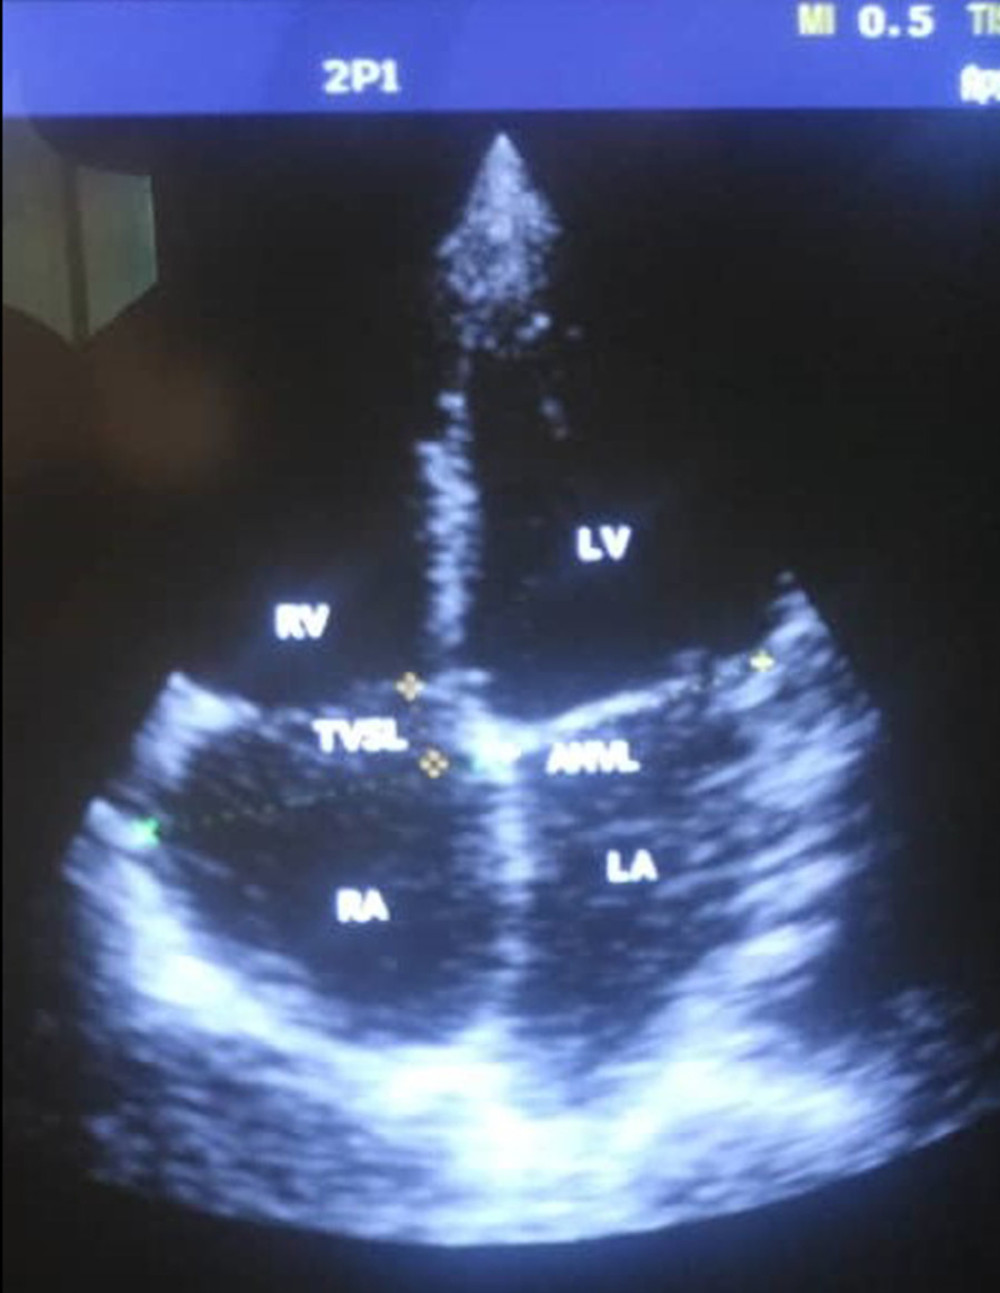 Displaced leaflets of tricuspid valve apically in apical 4-chamber view.